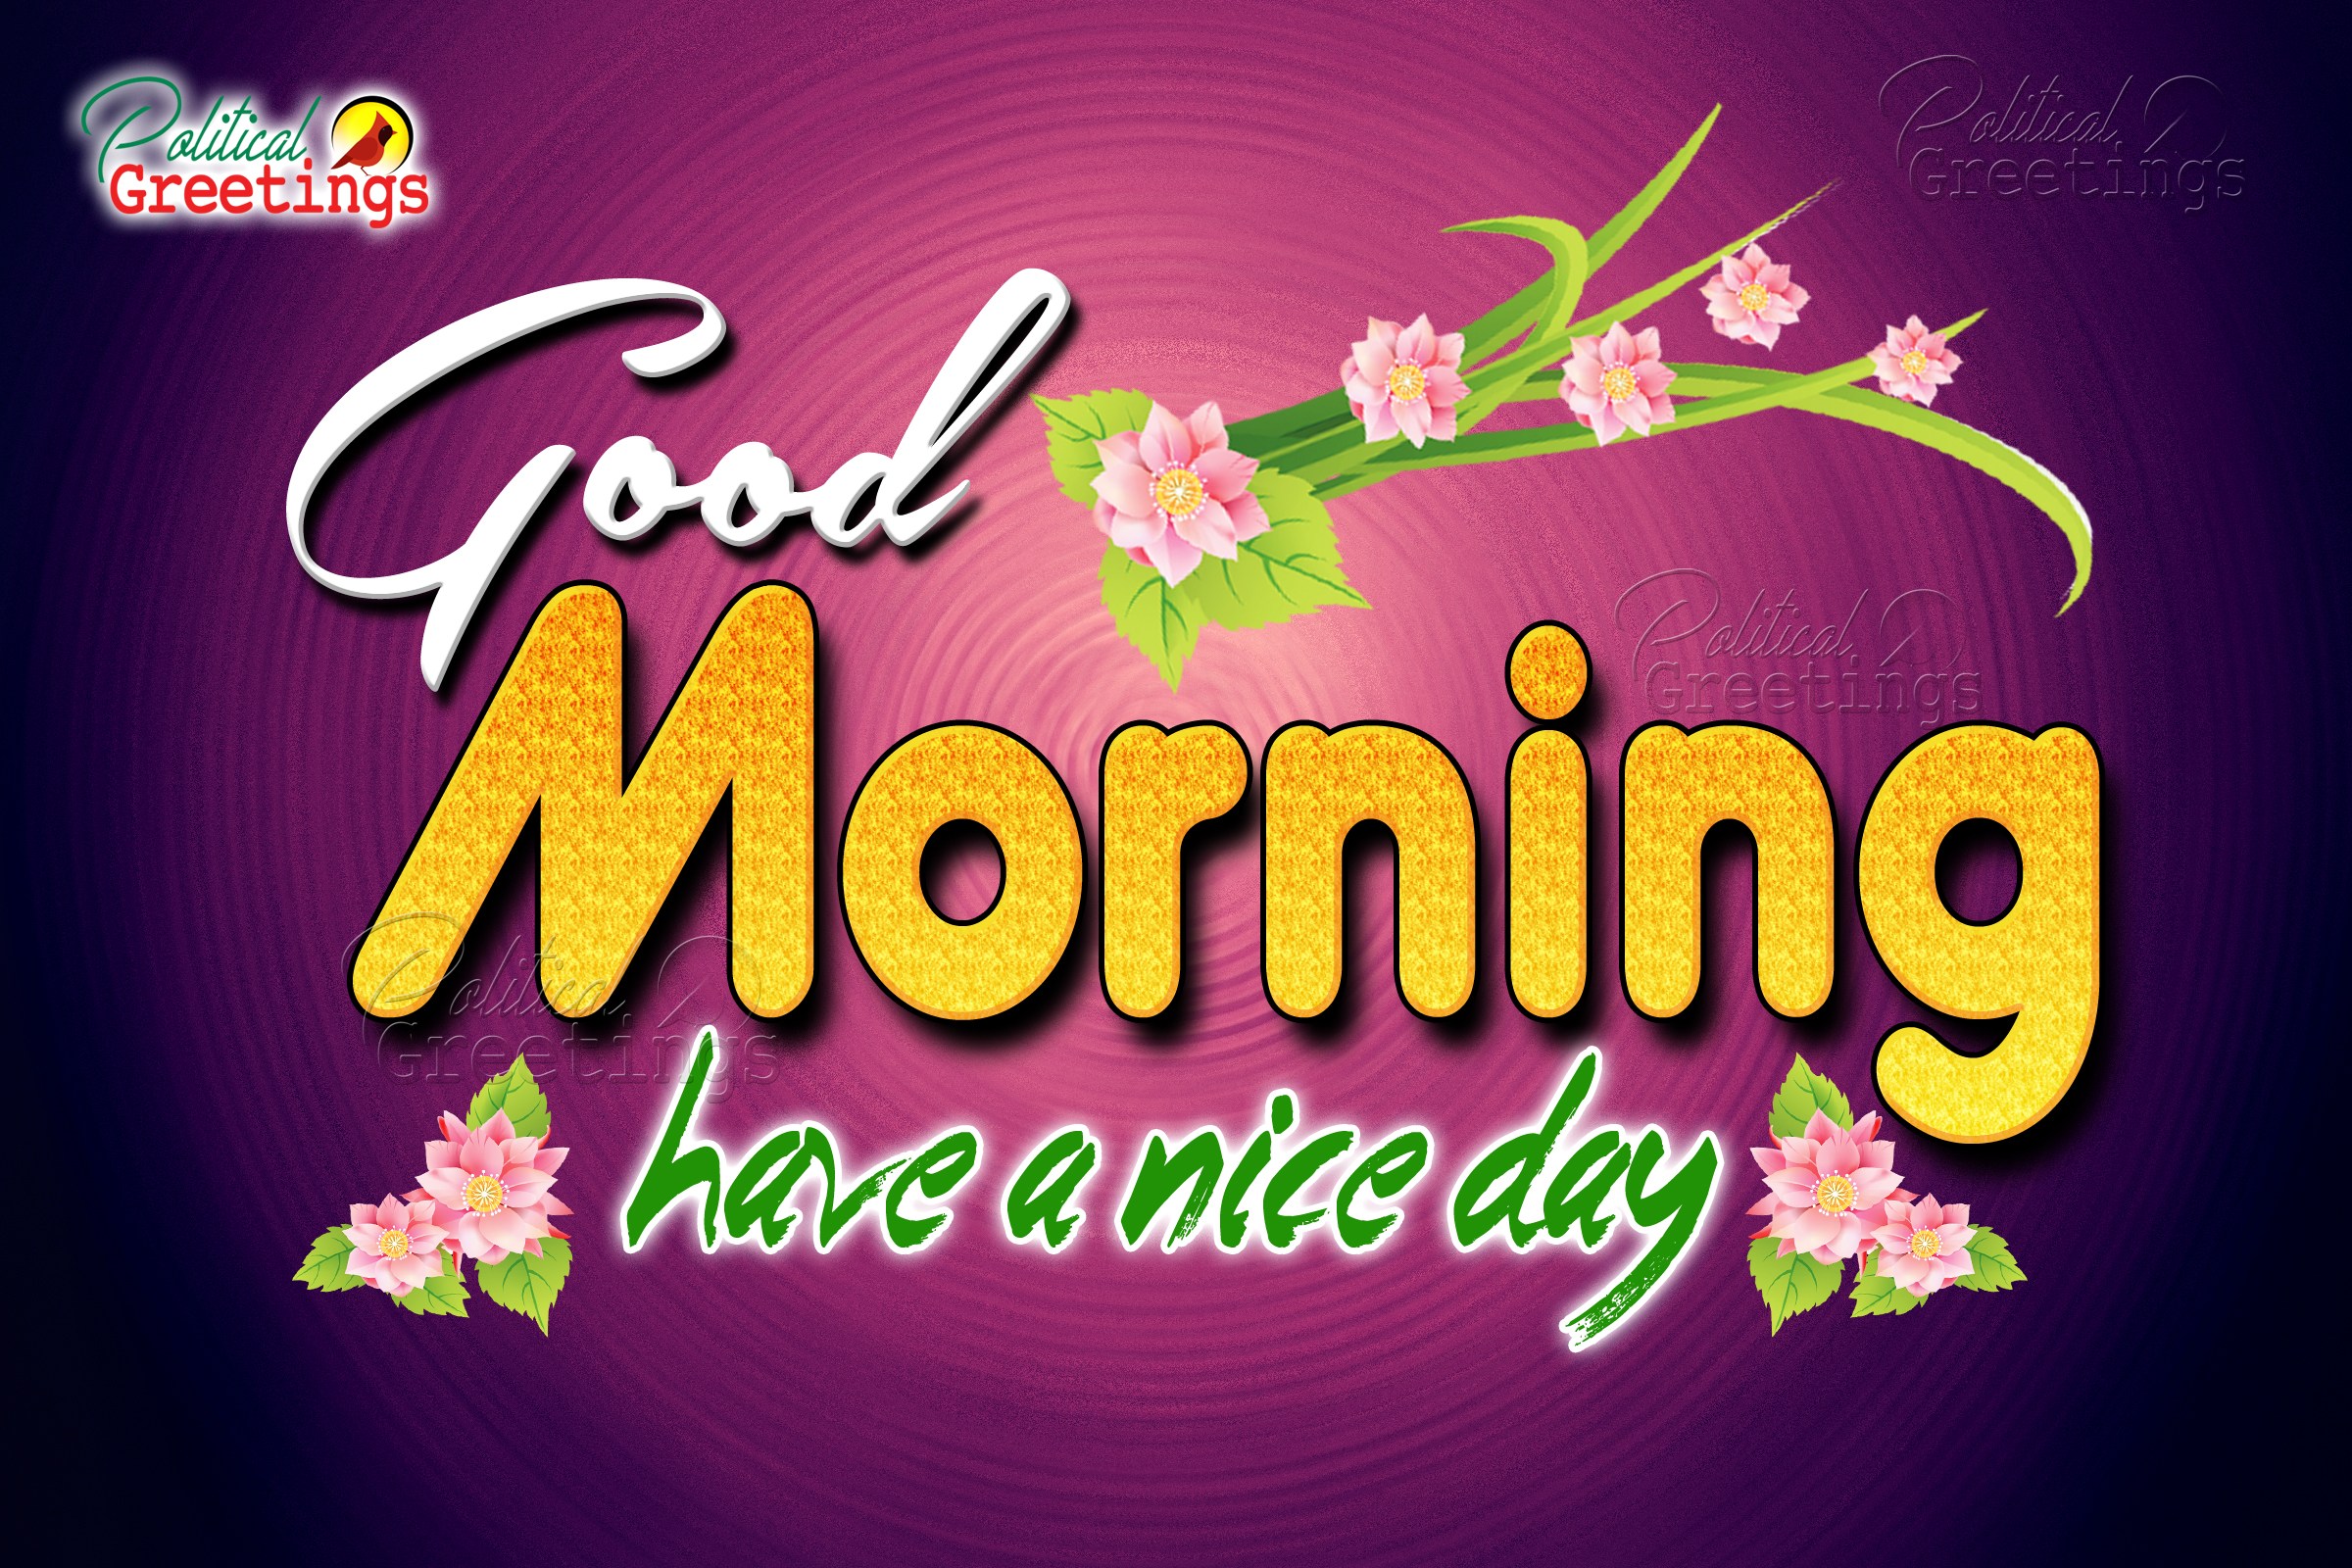 Good Morning Have A Nice Day Quotes Greetings Ecards - Graphic Design - HD Wallpaper 